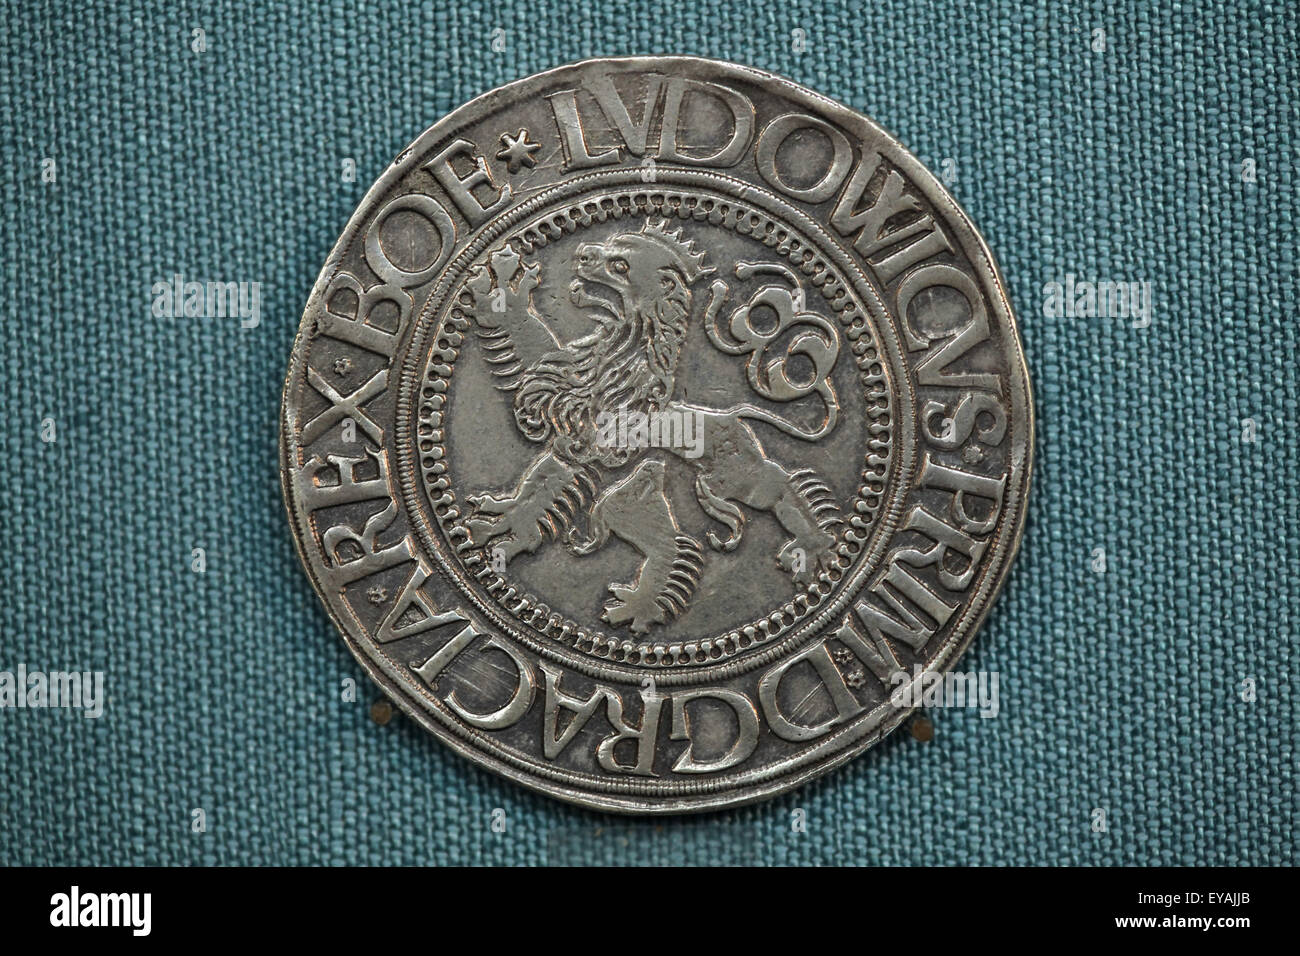 Bohemian Joachimsthaler. Silver coin minted in the 16th century in Joachimsthal, now Jachymov, Czech Republic. Kunsthistorisches Museum, Vienna, Austria. Bohemian heraldic lion is depicted on the reverse. Stock Photo